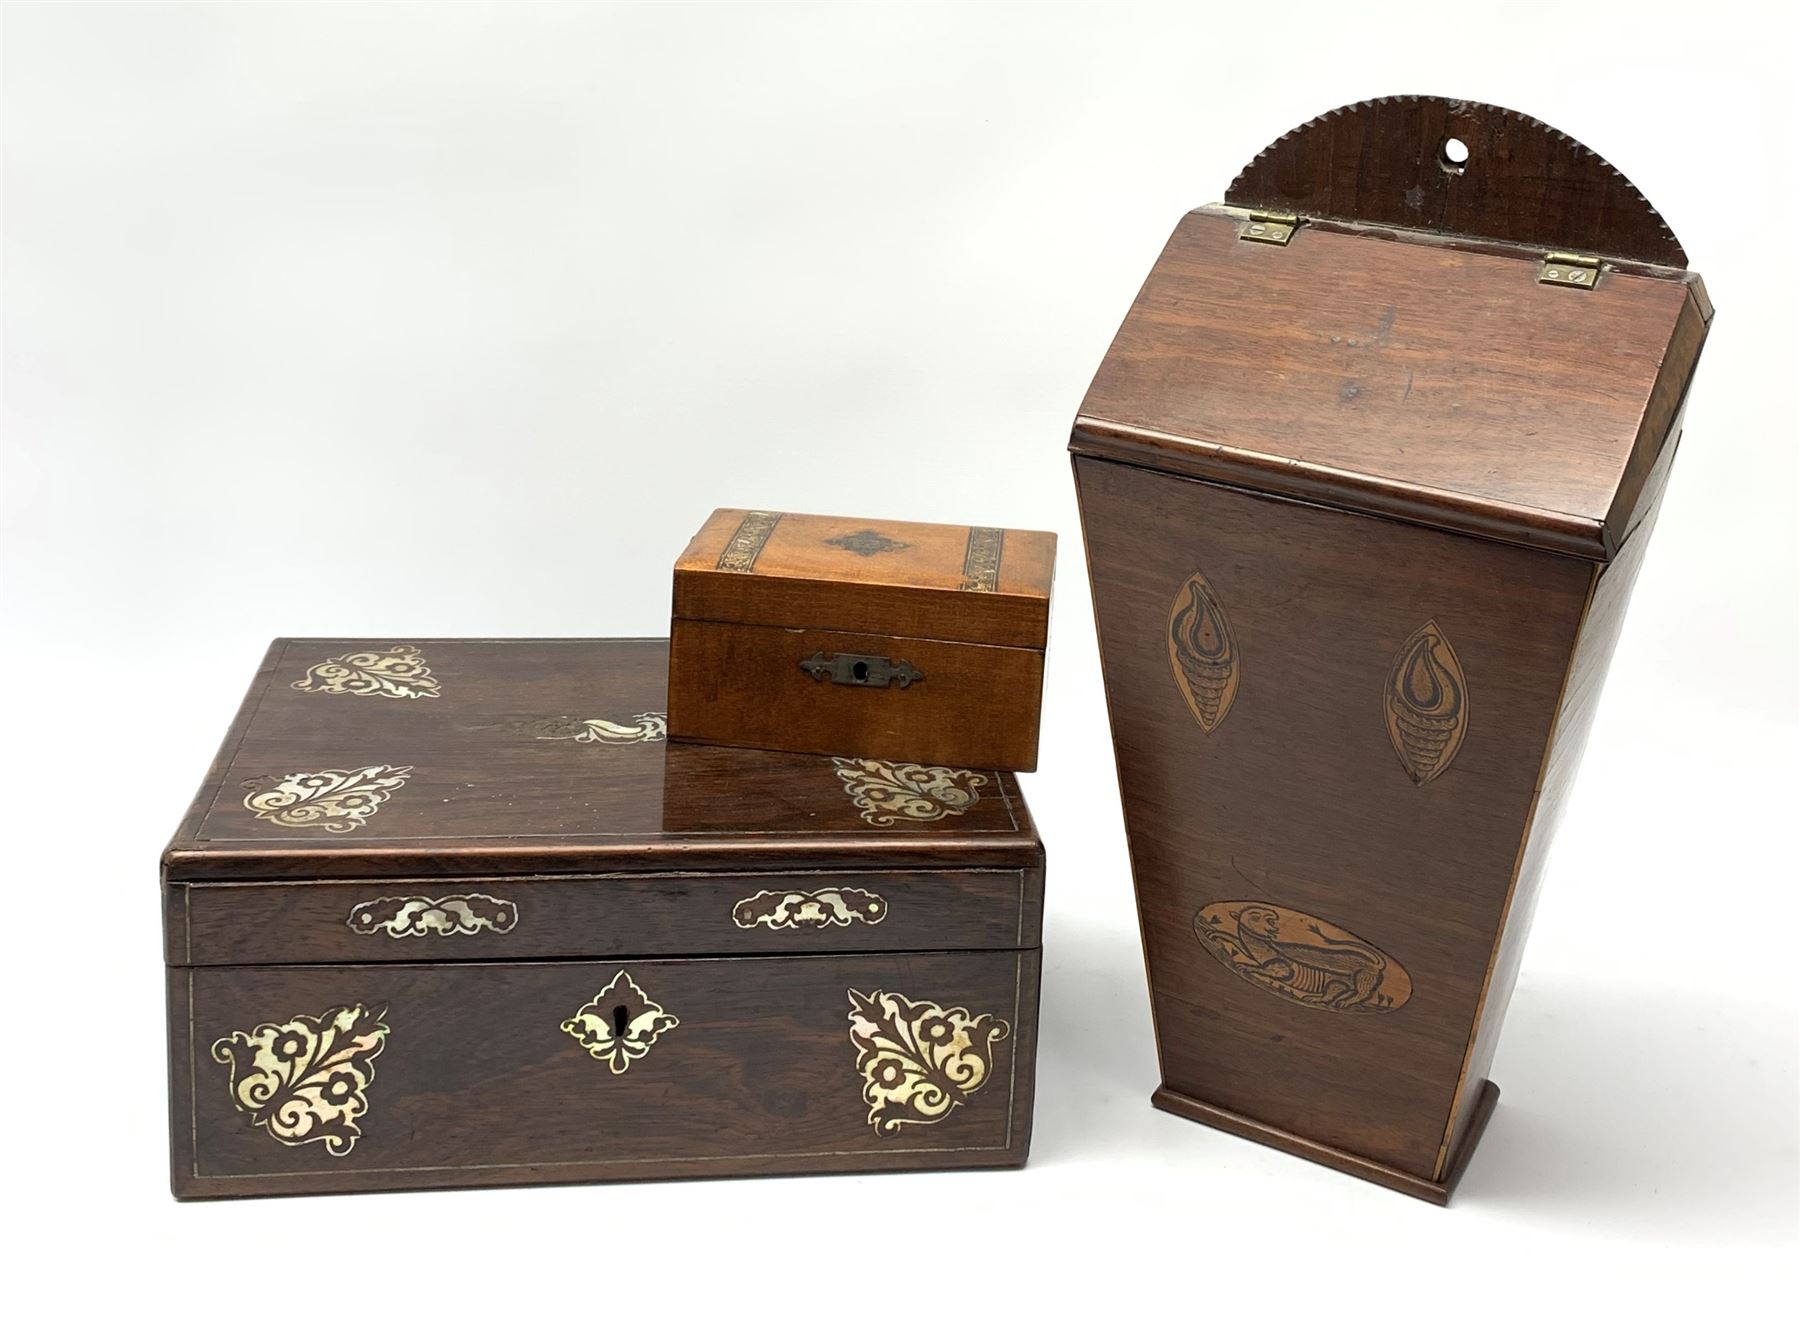 A 19th century rosewood and mother of pearl inlaid jewellery box